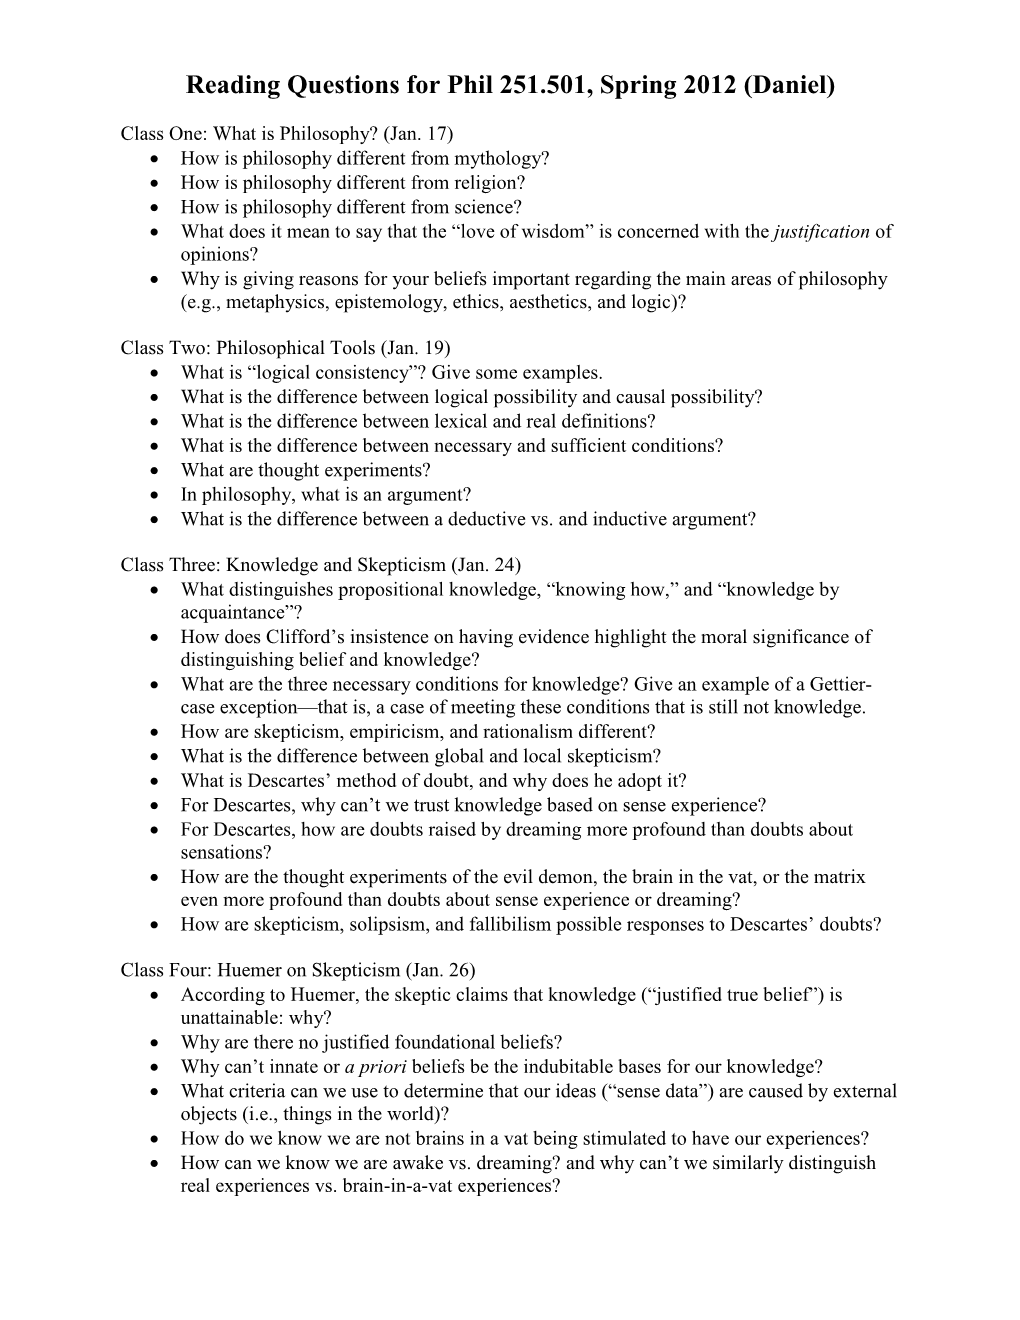 Reading Questions for Phil 251.501, Spring 2012 (Daniel)